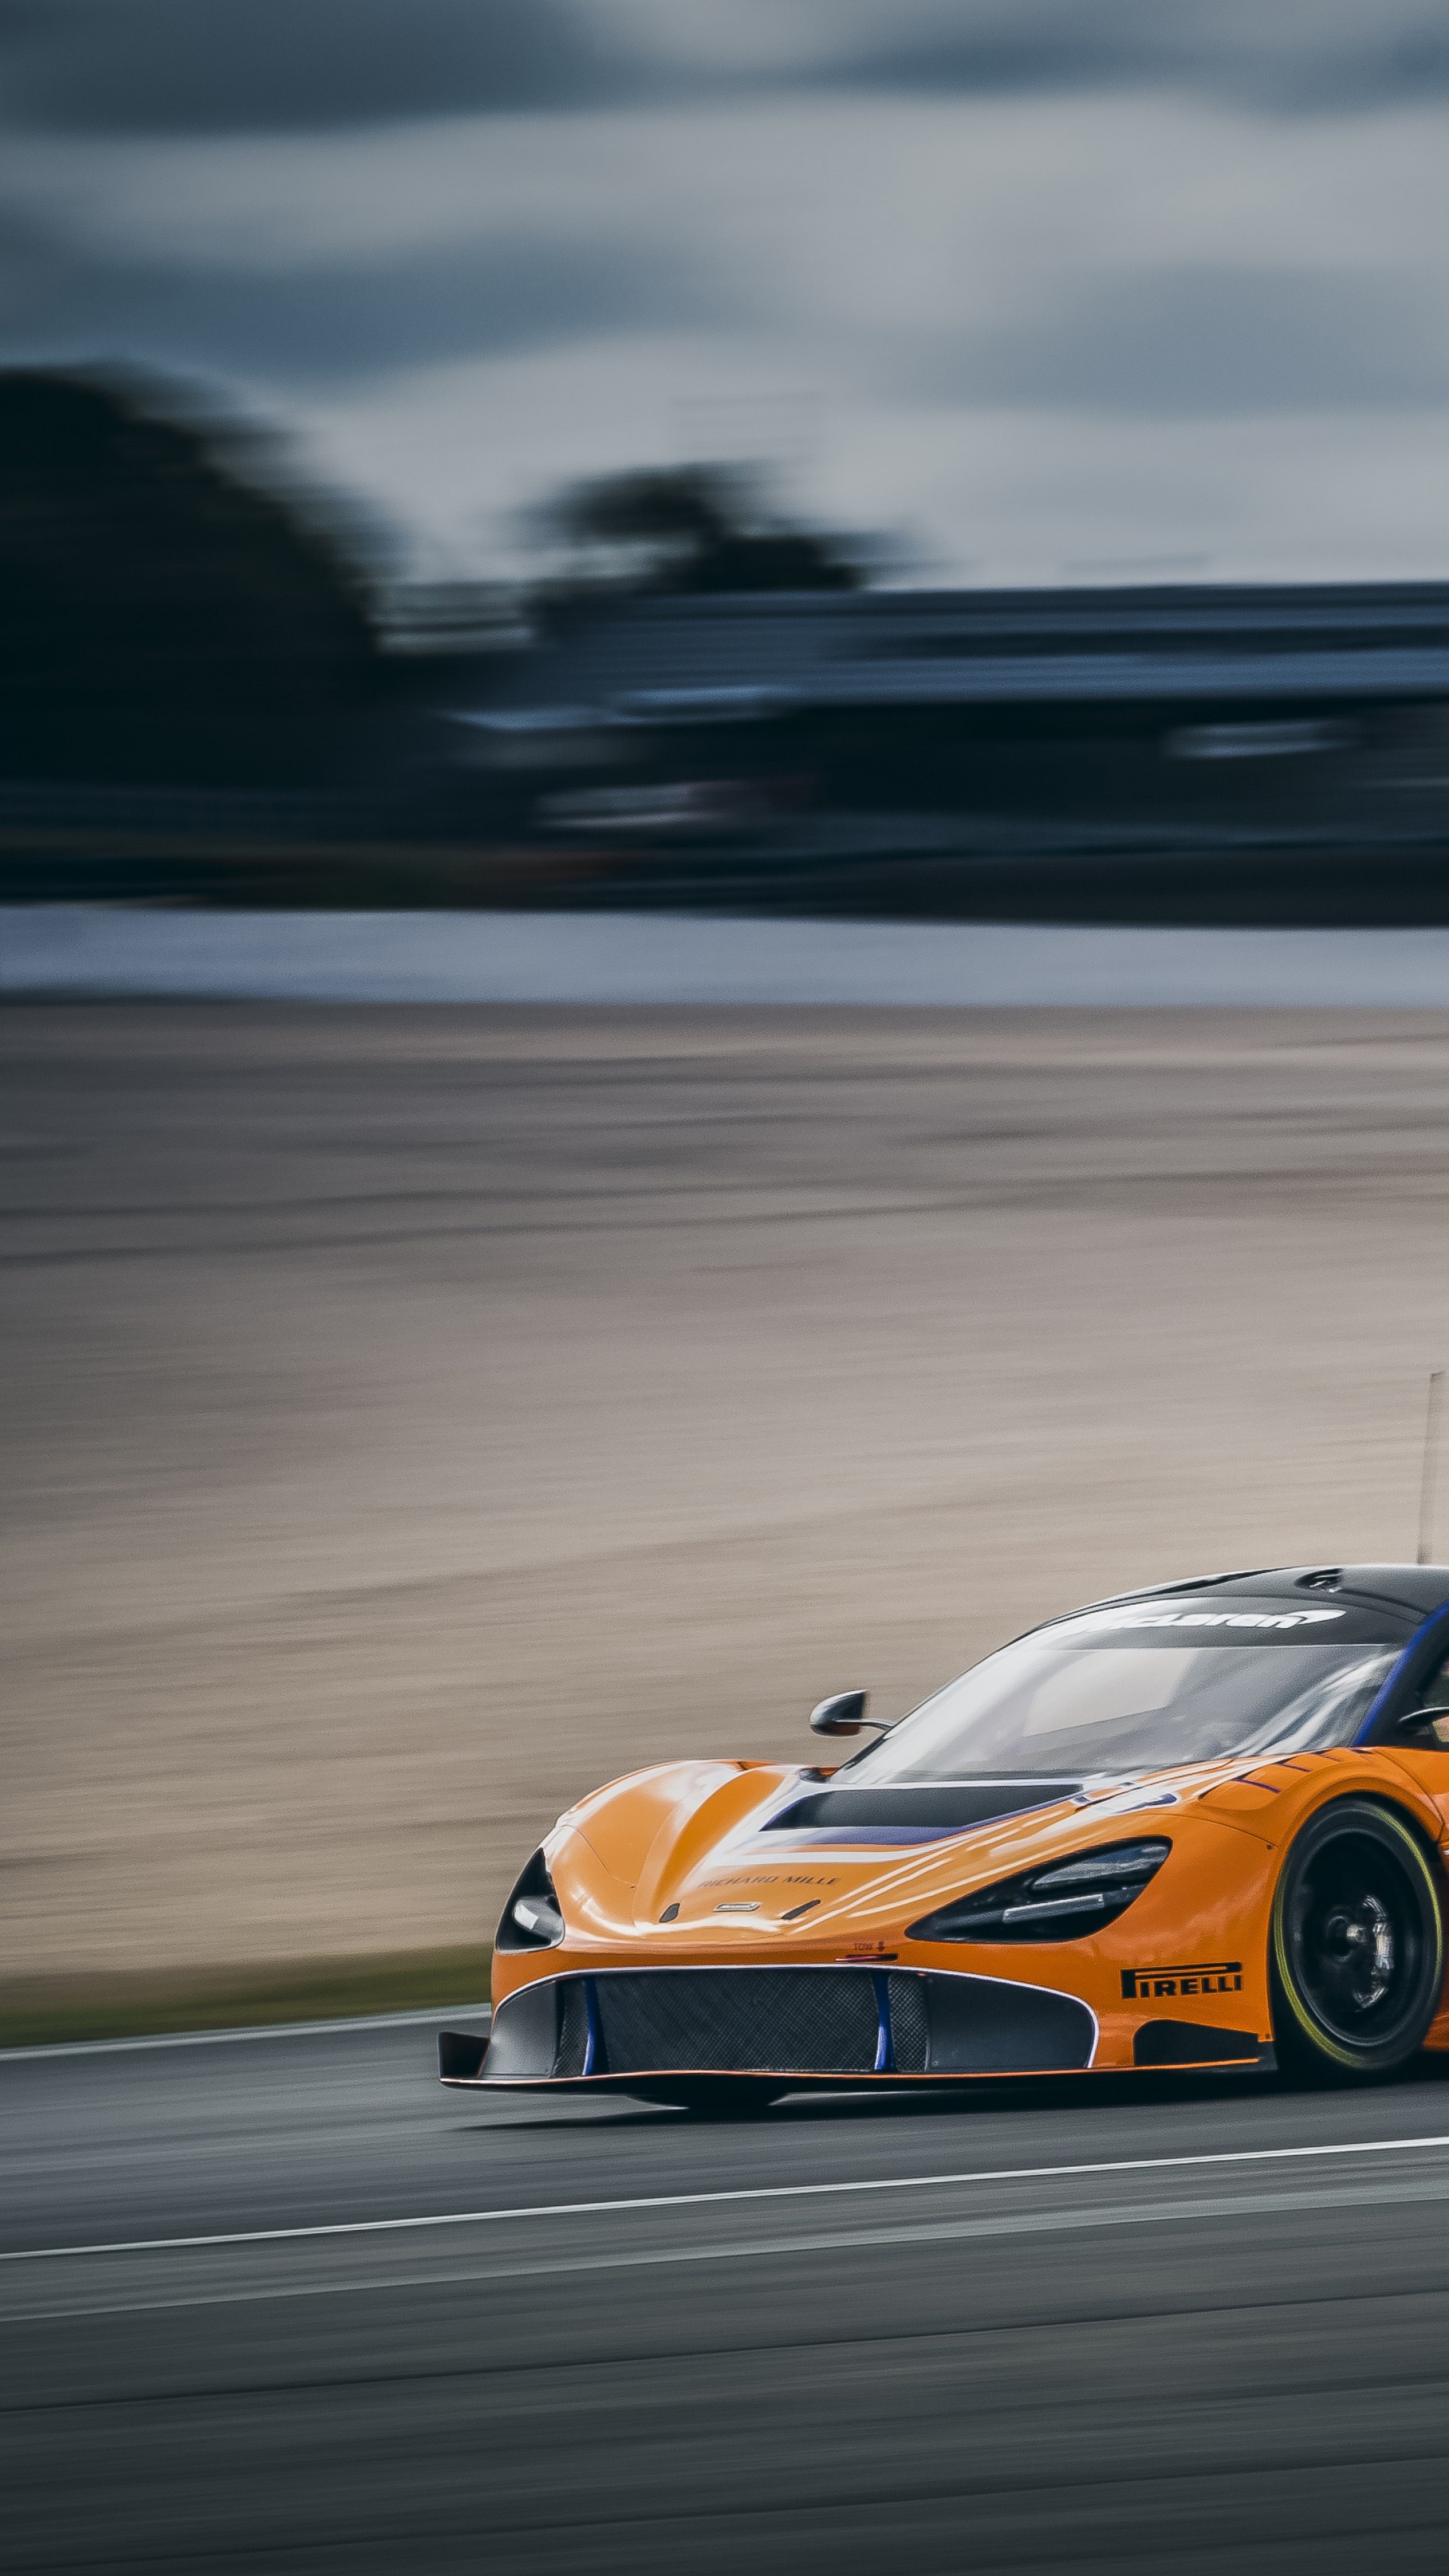 Endurance Racing: McLaren 720S GT3, Supercar, High Speed, Launched At The Geneva Motor Show On March 2017. 2160x3840 4K Wallpaper.